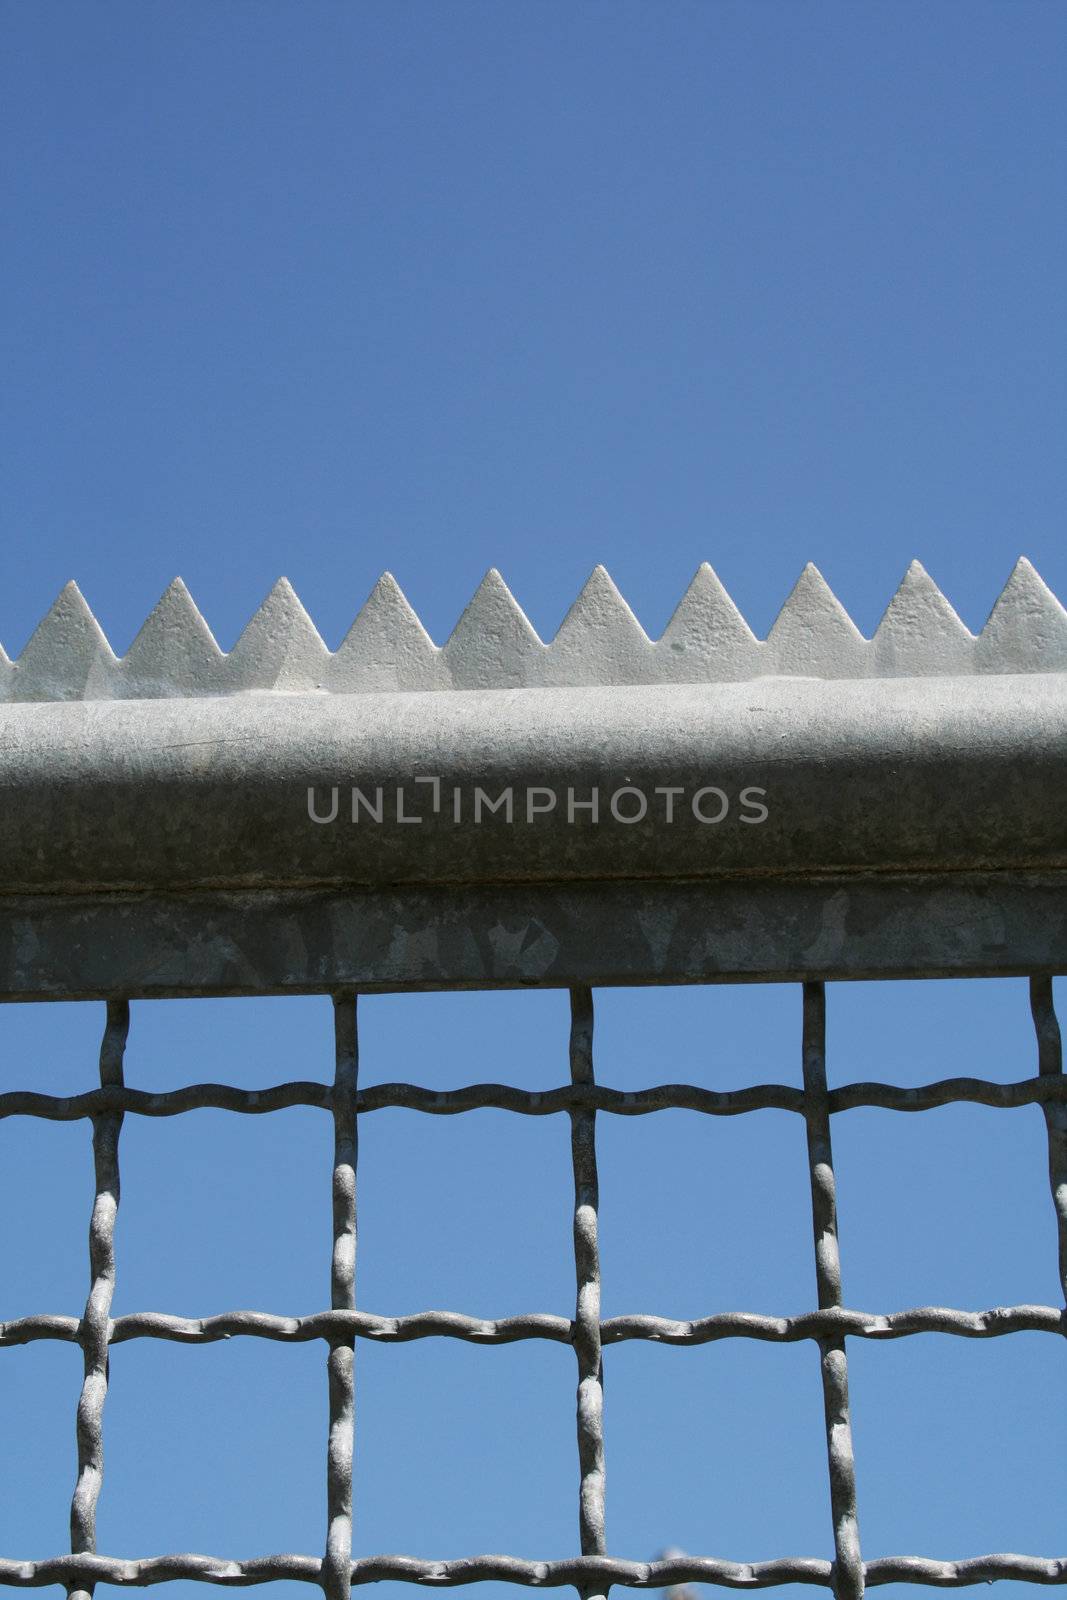 metal fence with with edges and tines